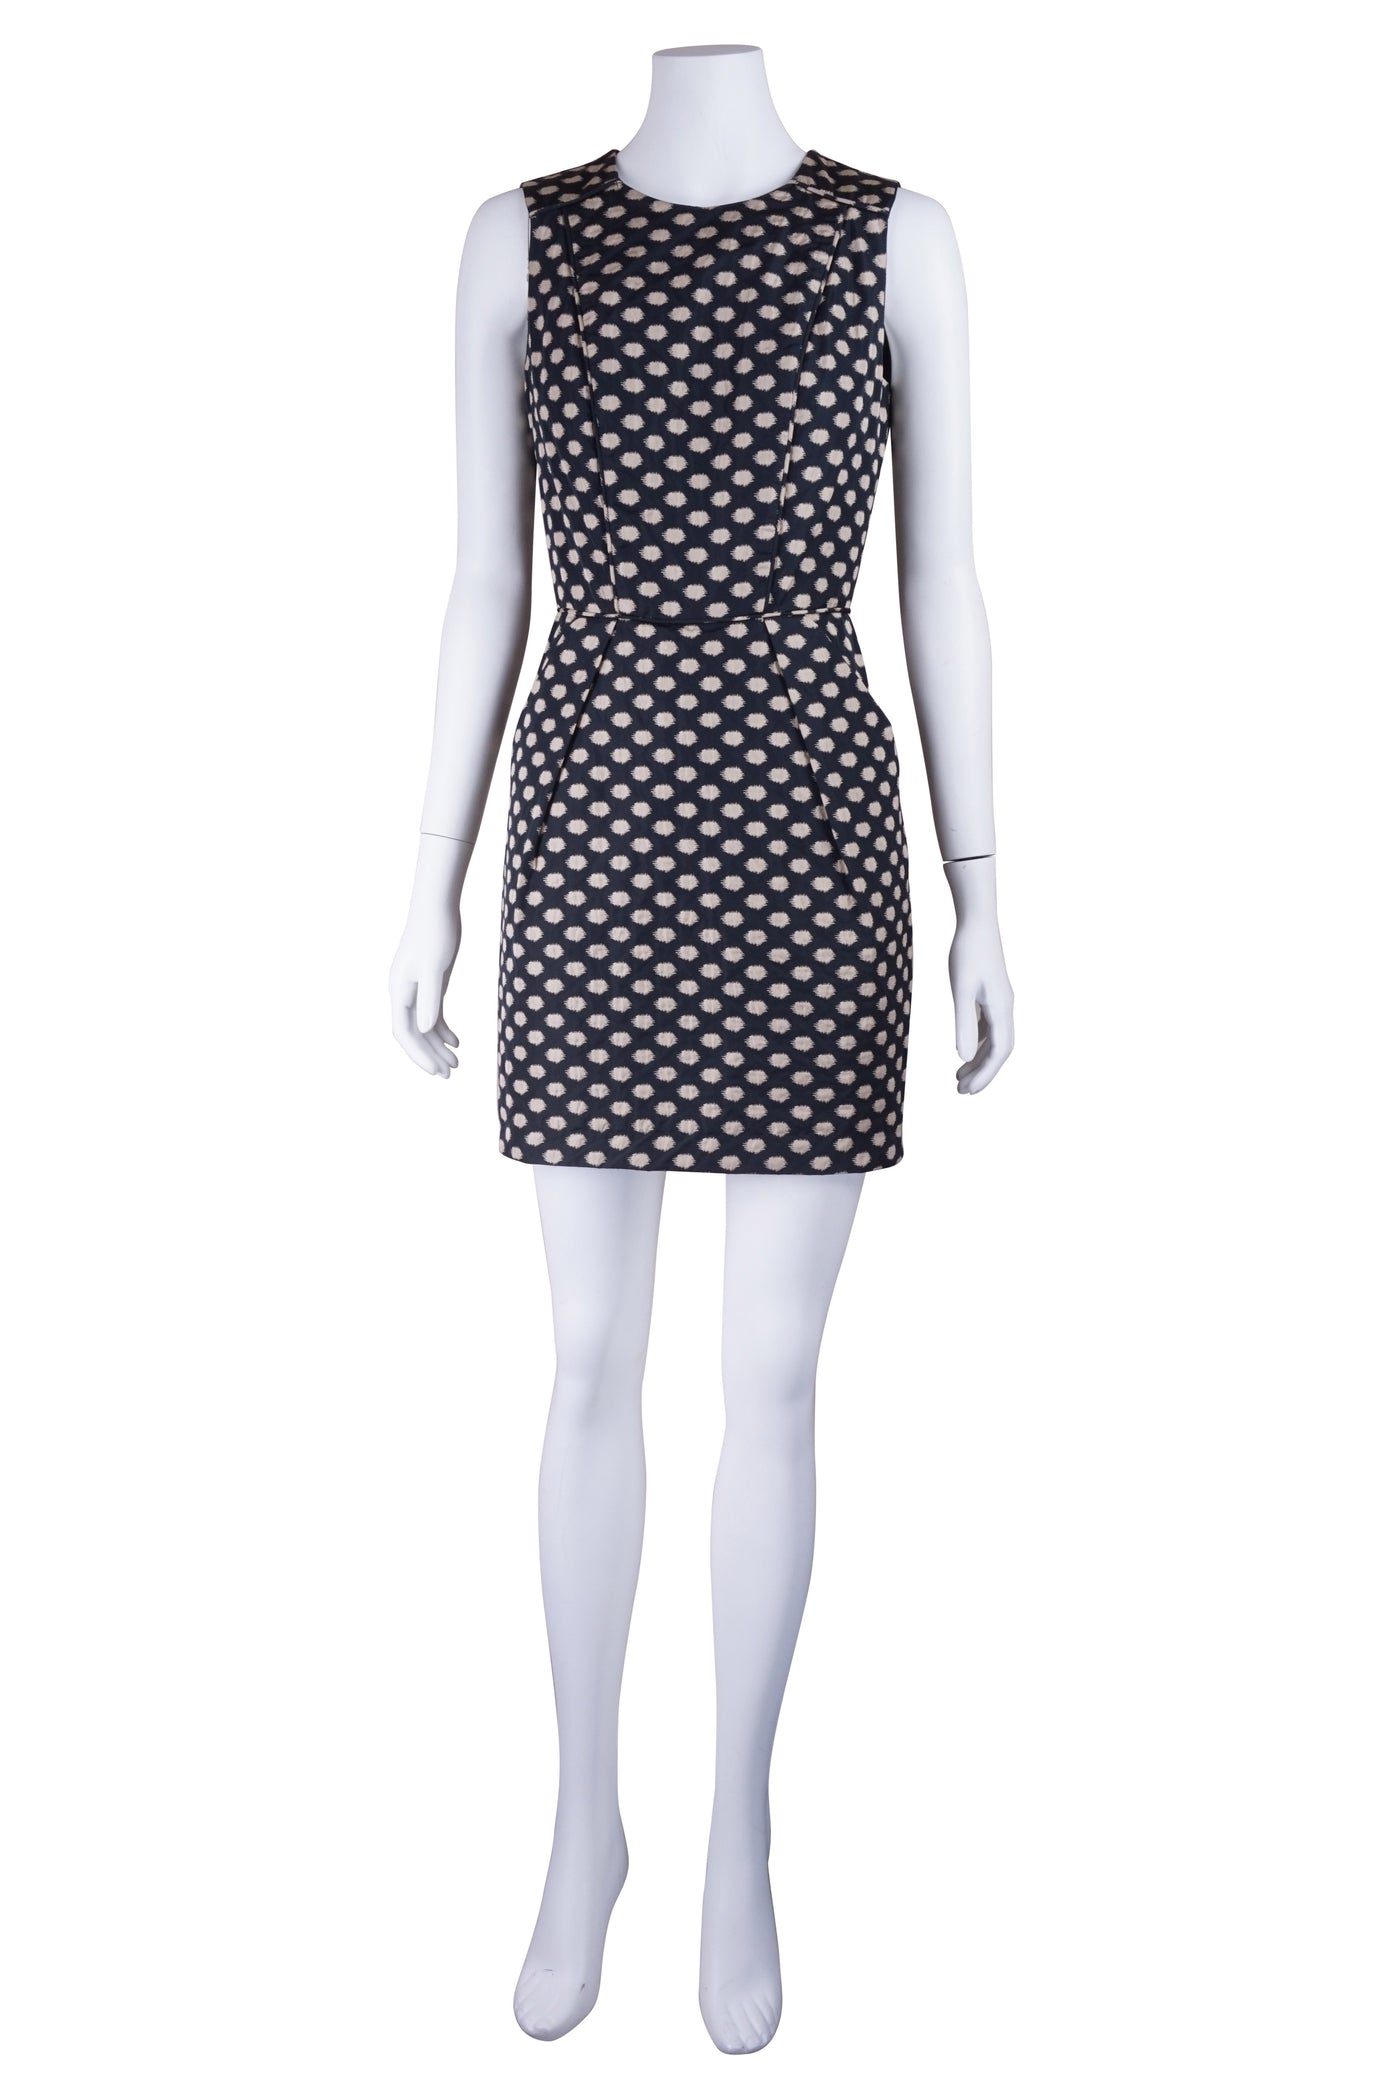 Intropia Black spotted dress